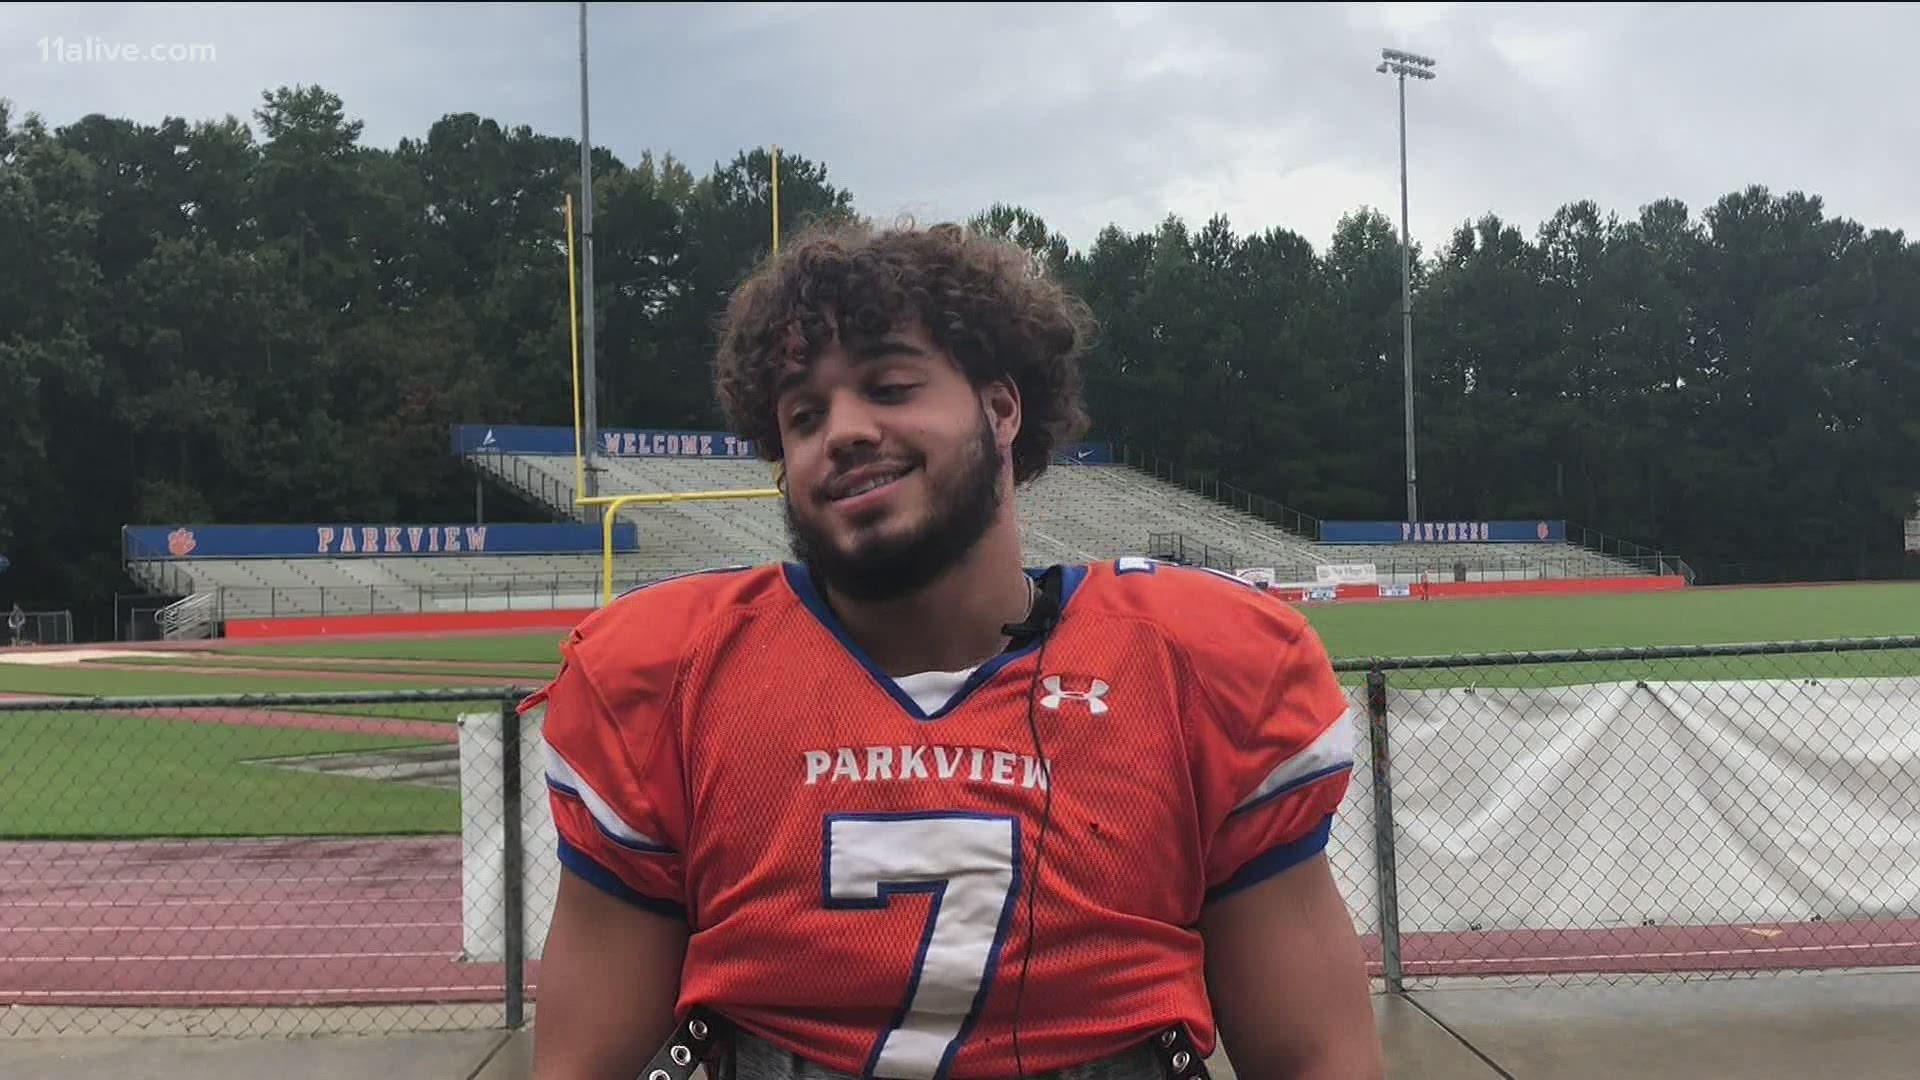 Tennessee commit Cody Brown on what led him to Knoxville, goals for last year with Parkview